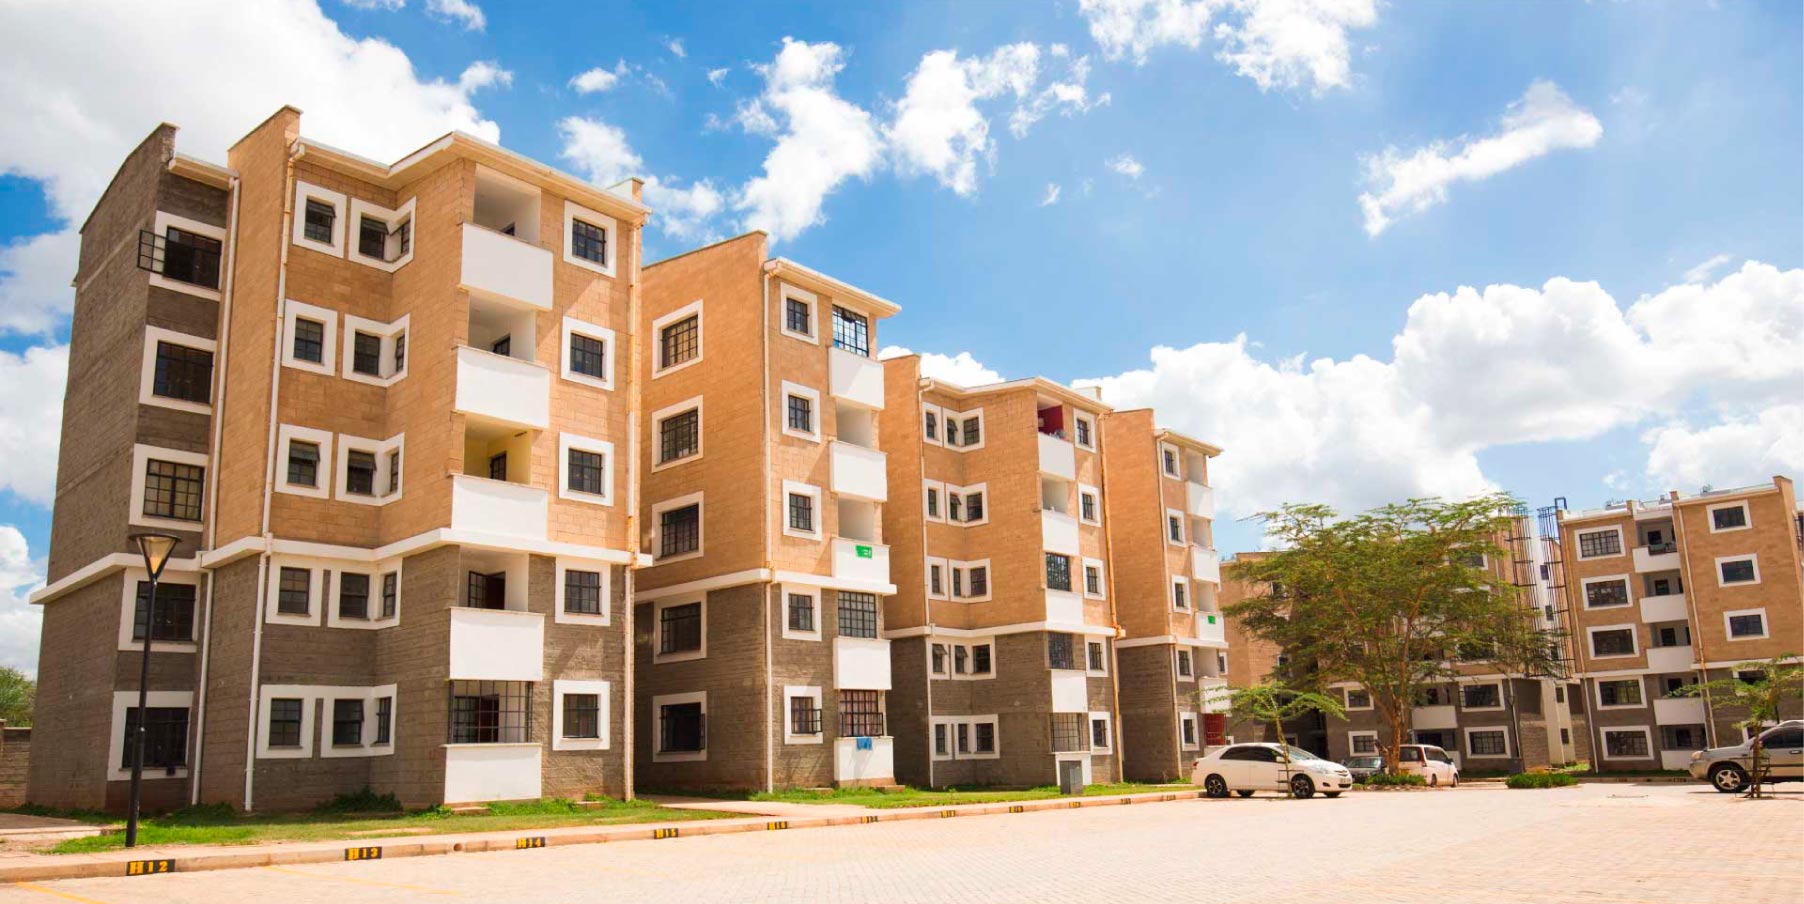 Karibu Homes launches new phase at Riverview